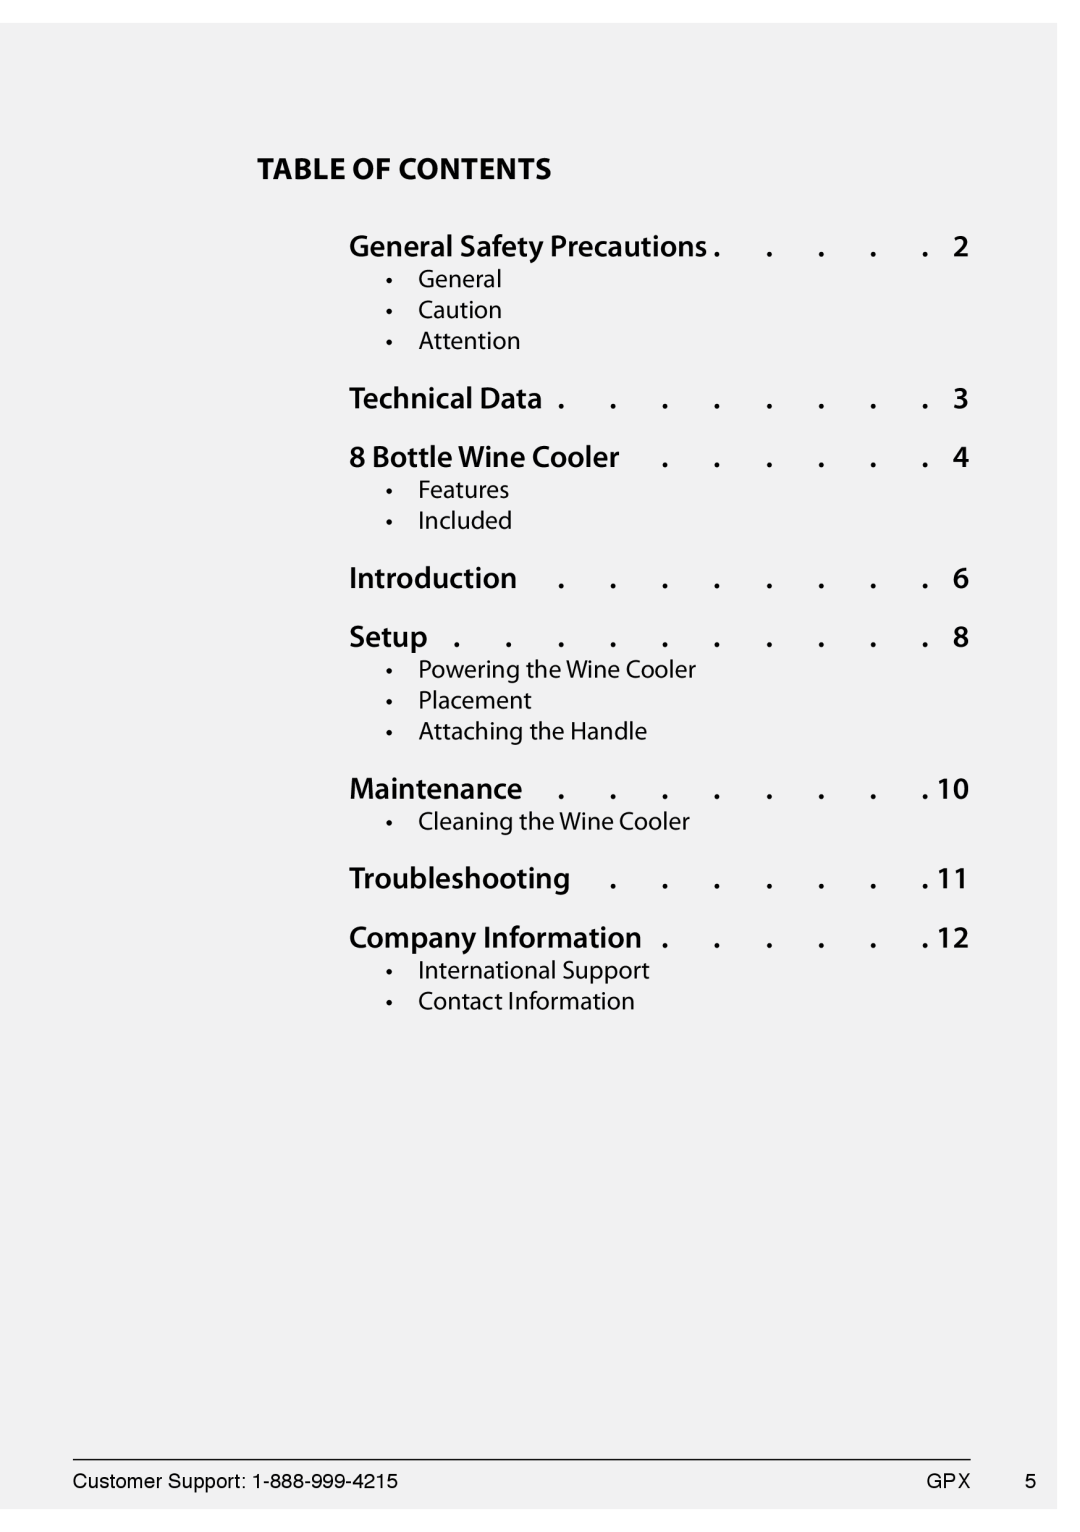 GPX 0806-0719-10, AW80S manual Table of Contents 